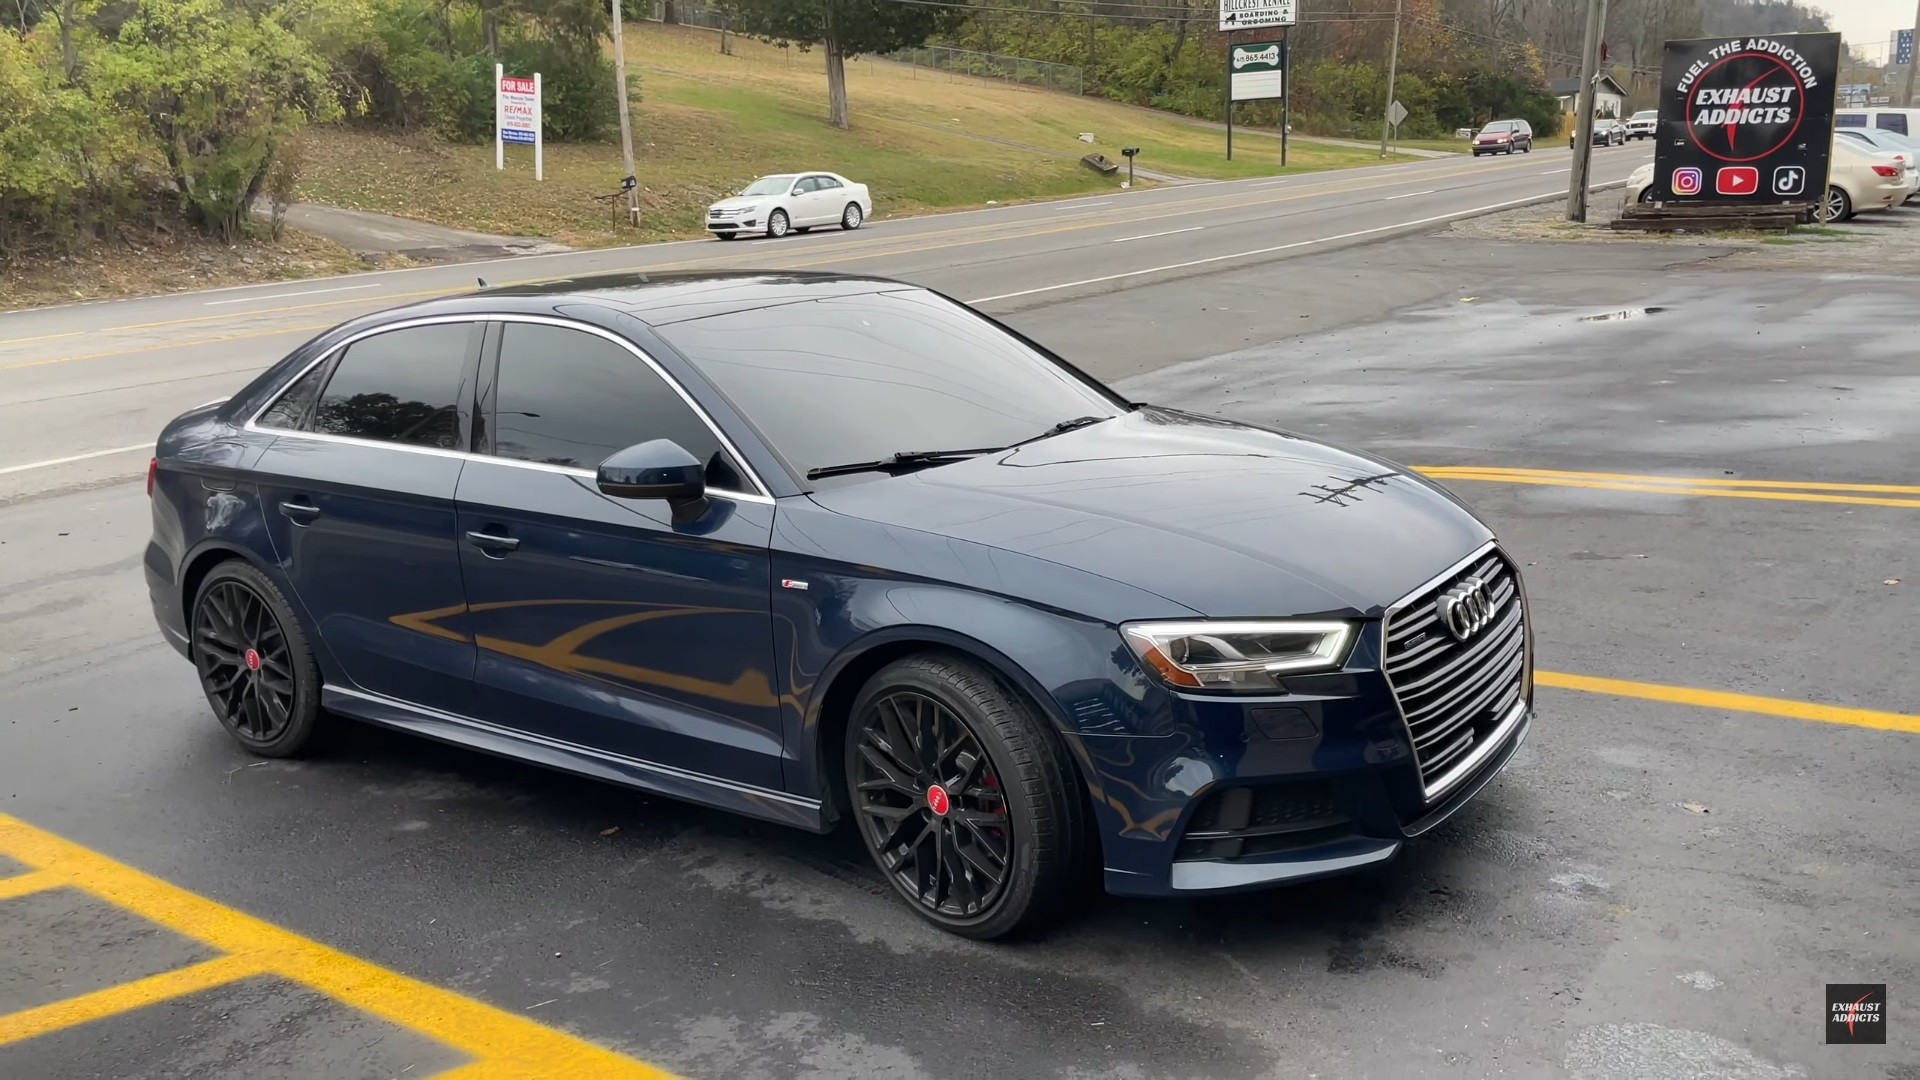 Video: Straight-Piping an Audi A3 Sedan Sounds Like Money Thrown